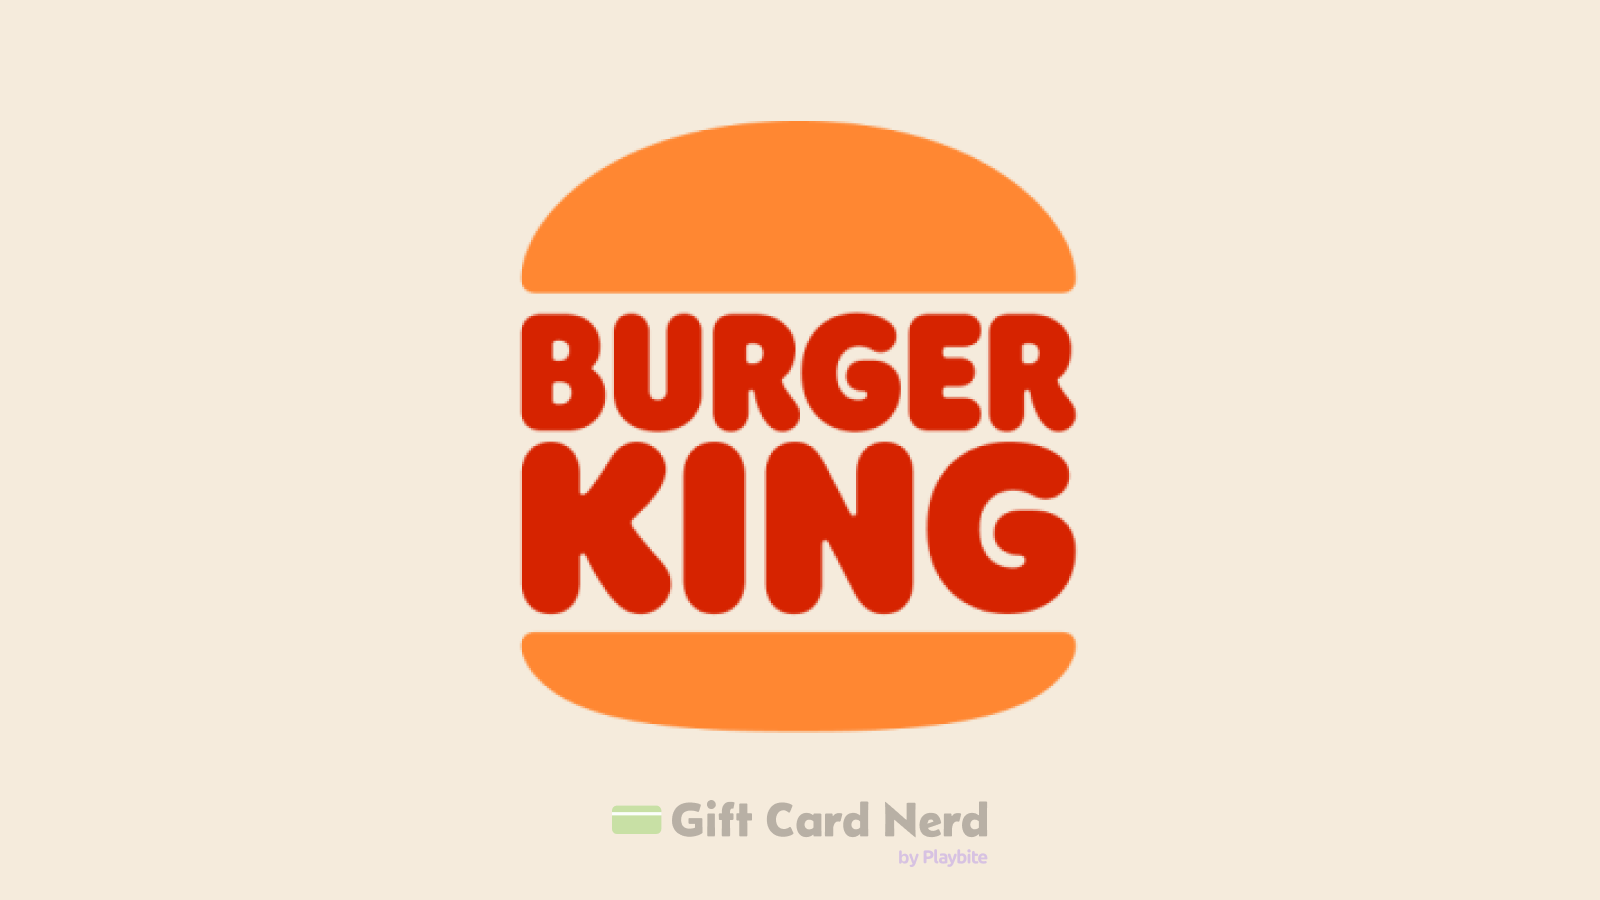 Can You Buy Burger King Gift Cards on Amazon?